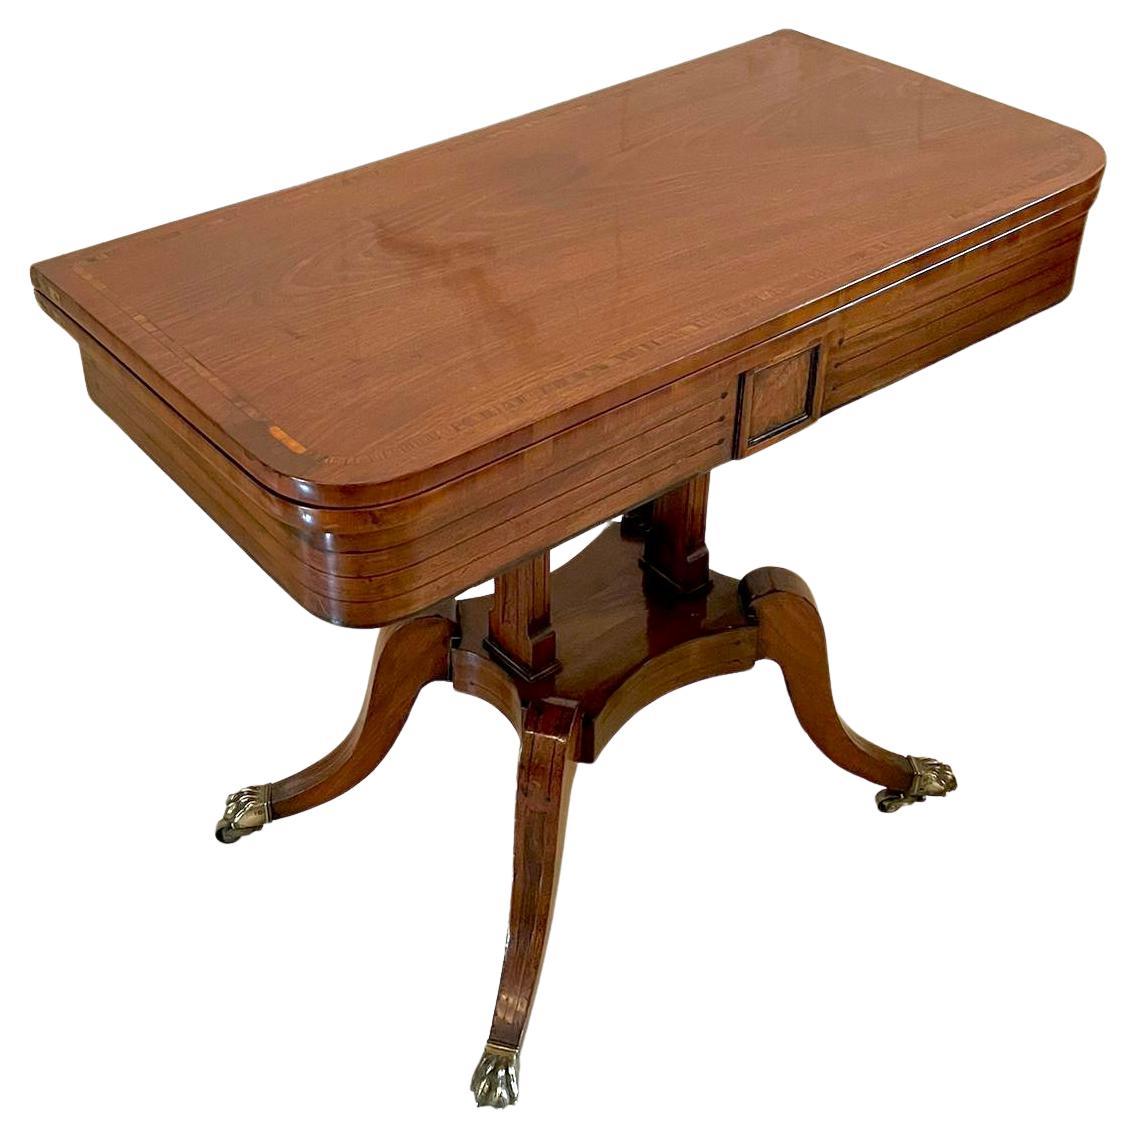 Quality Antique Regency Mahogany Inlaid Card/Side Table